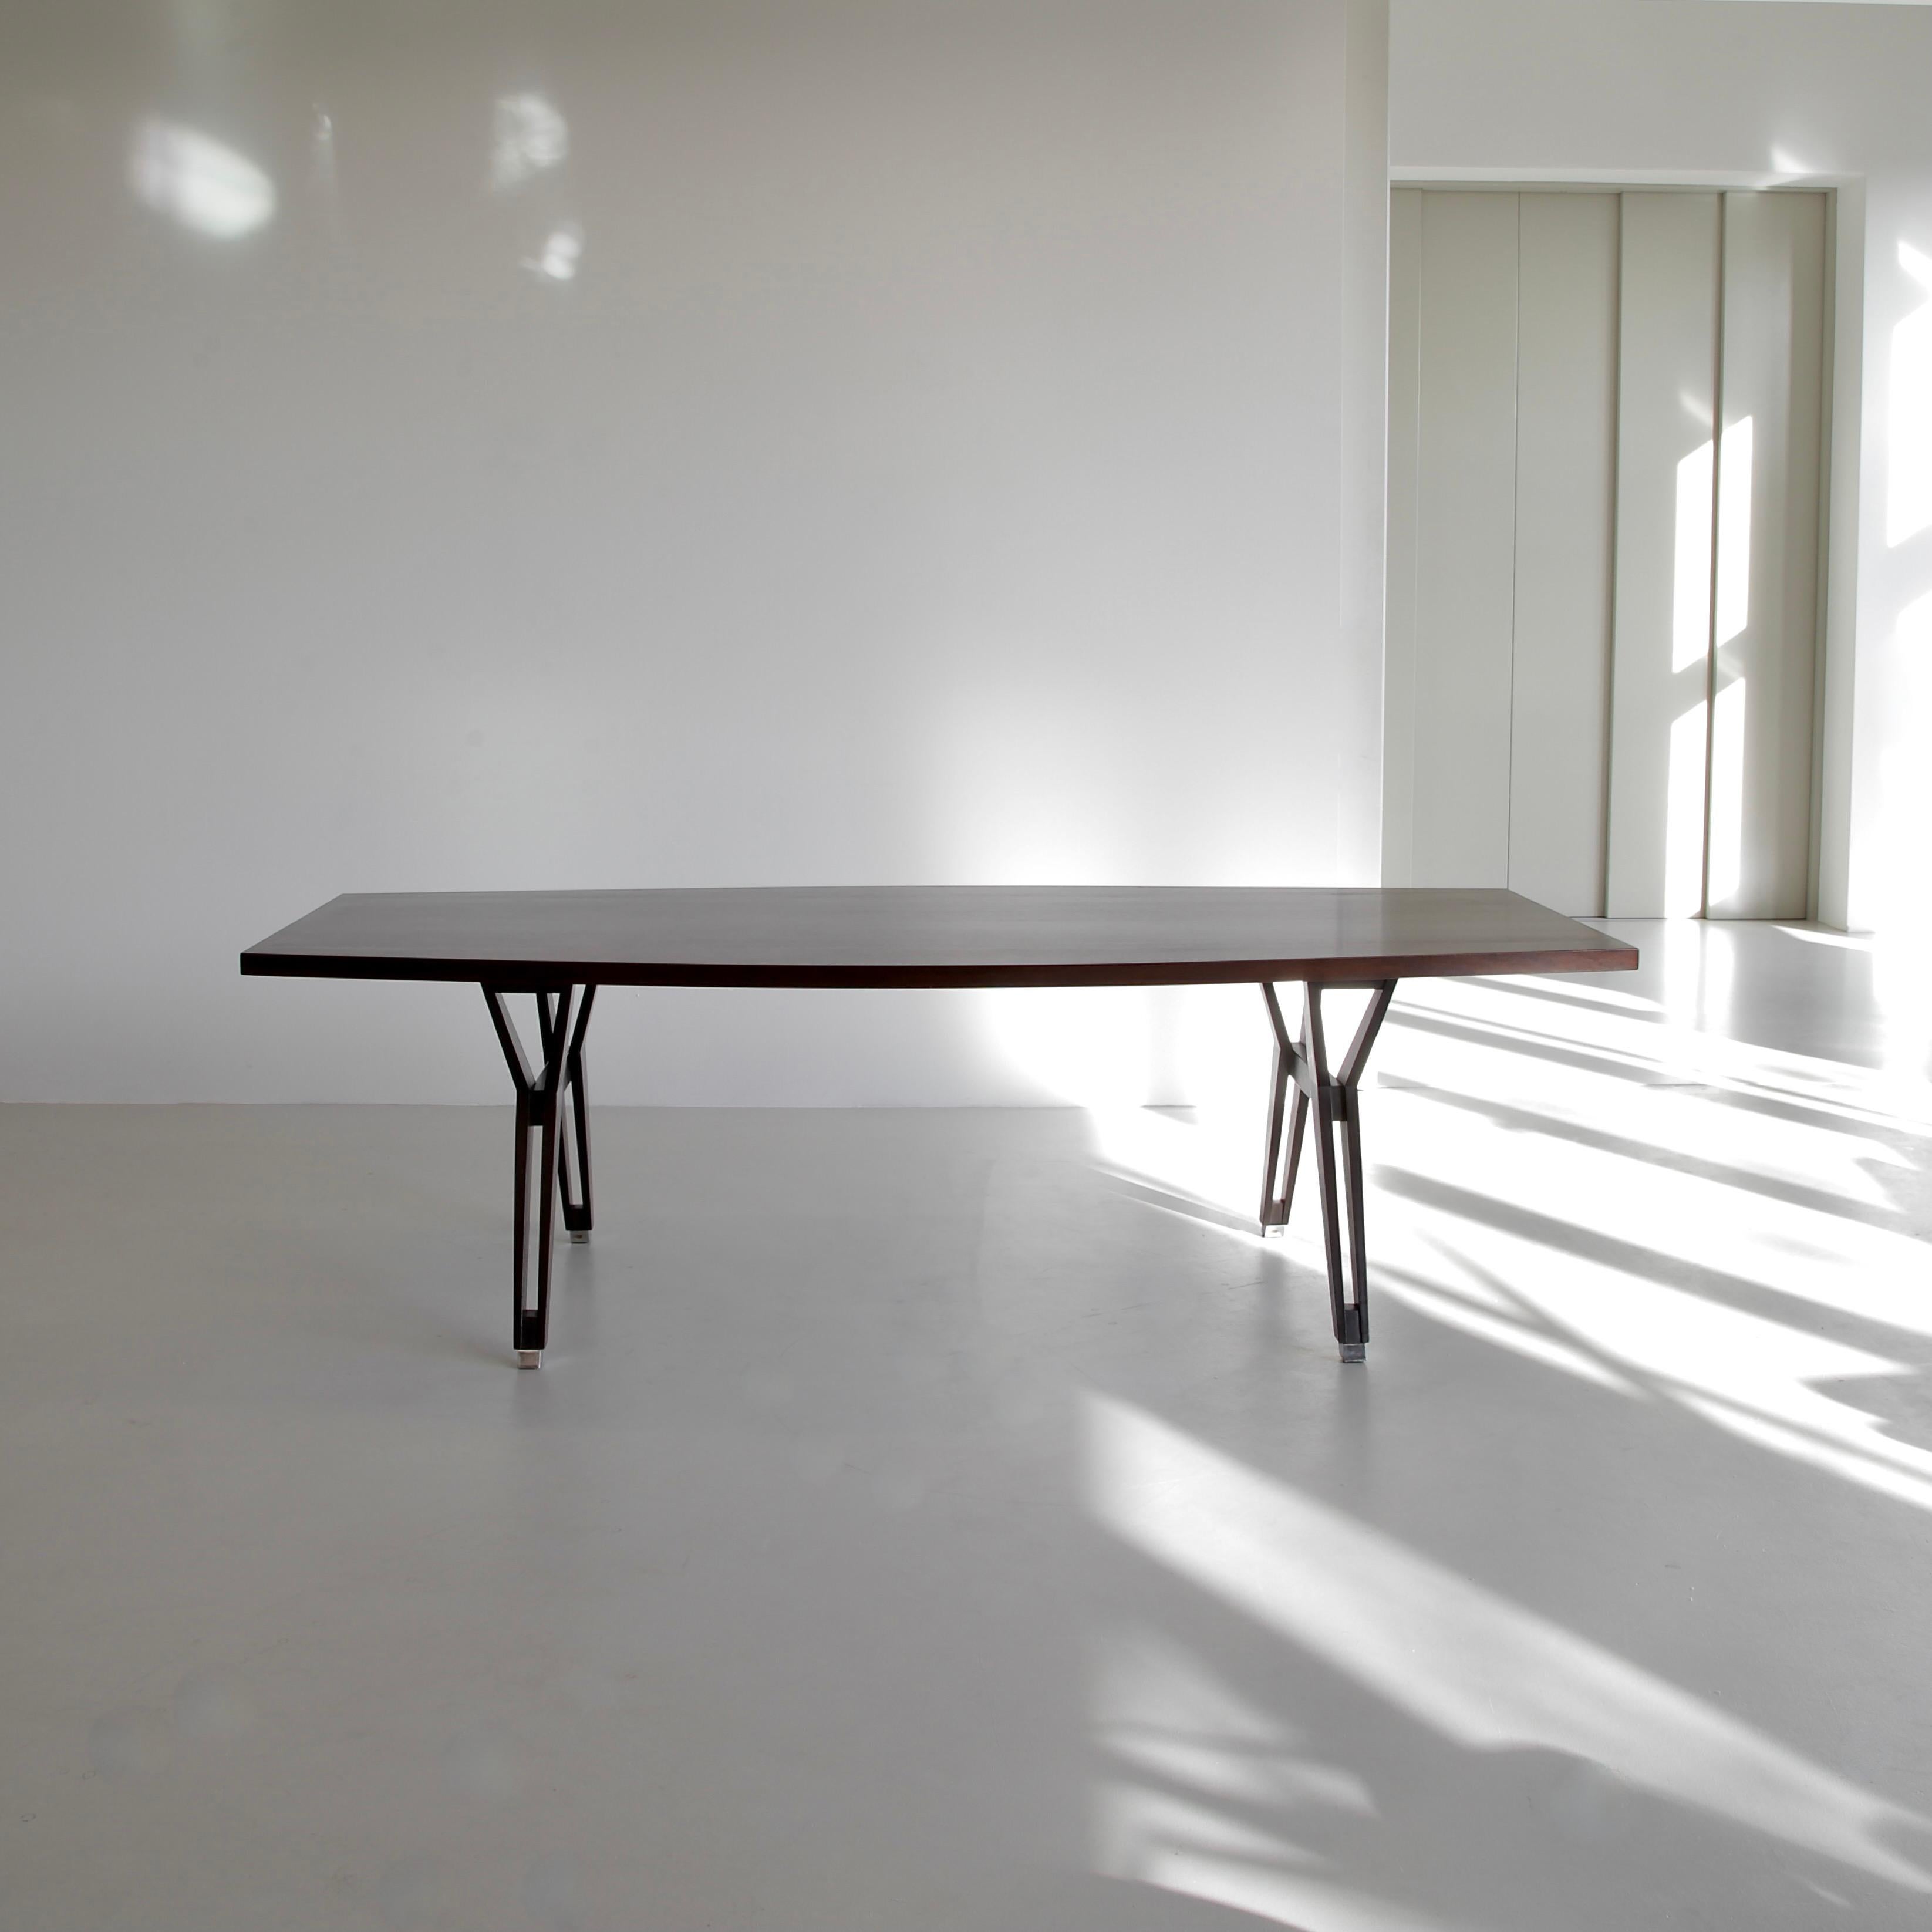 Table 'Tolomeo' designed by Ico Parisi & Ennio Fazioli. Italy, MIM Roma, 1963.

Wooden table, extensively re-designed by Ennio Fazioli in the 1960s using Ico Parisi's 'Terni' desk (1958) as the basis. Elegant boat-shaped tabletop and the typical